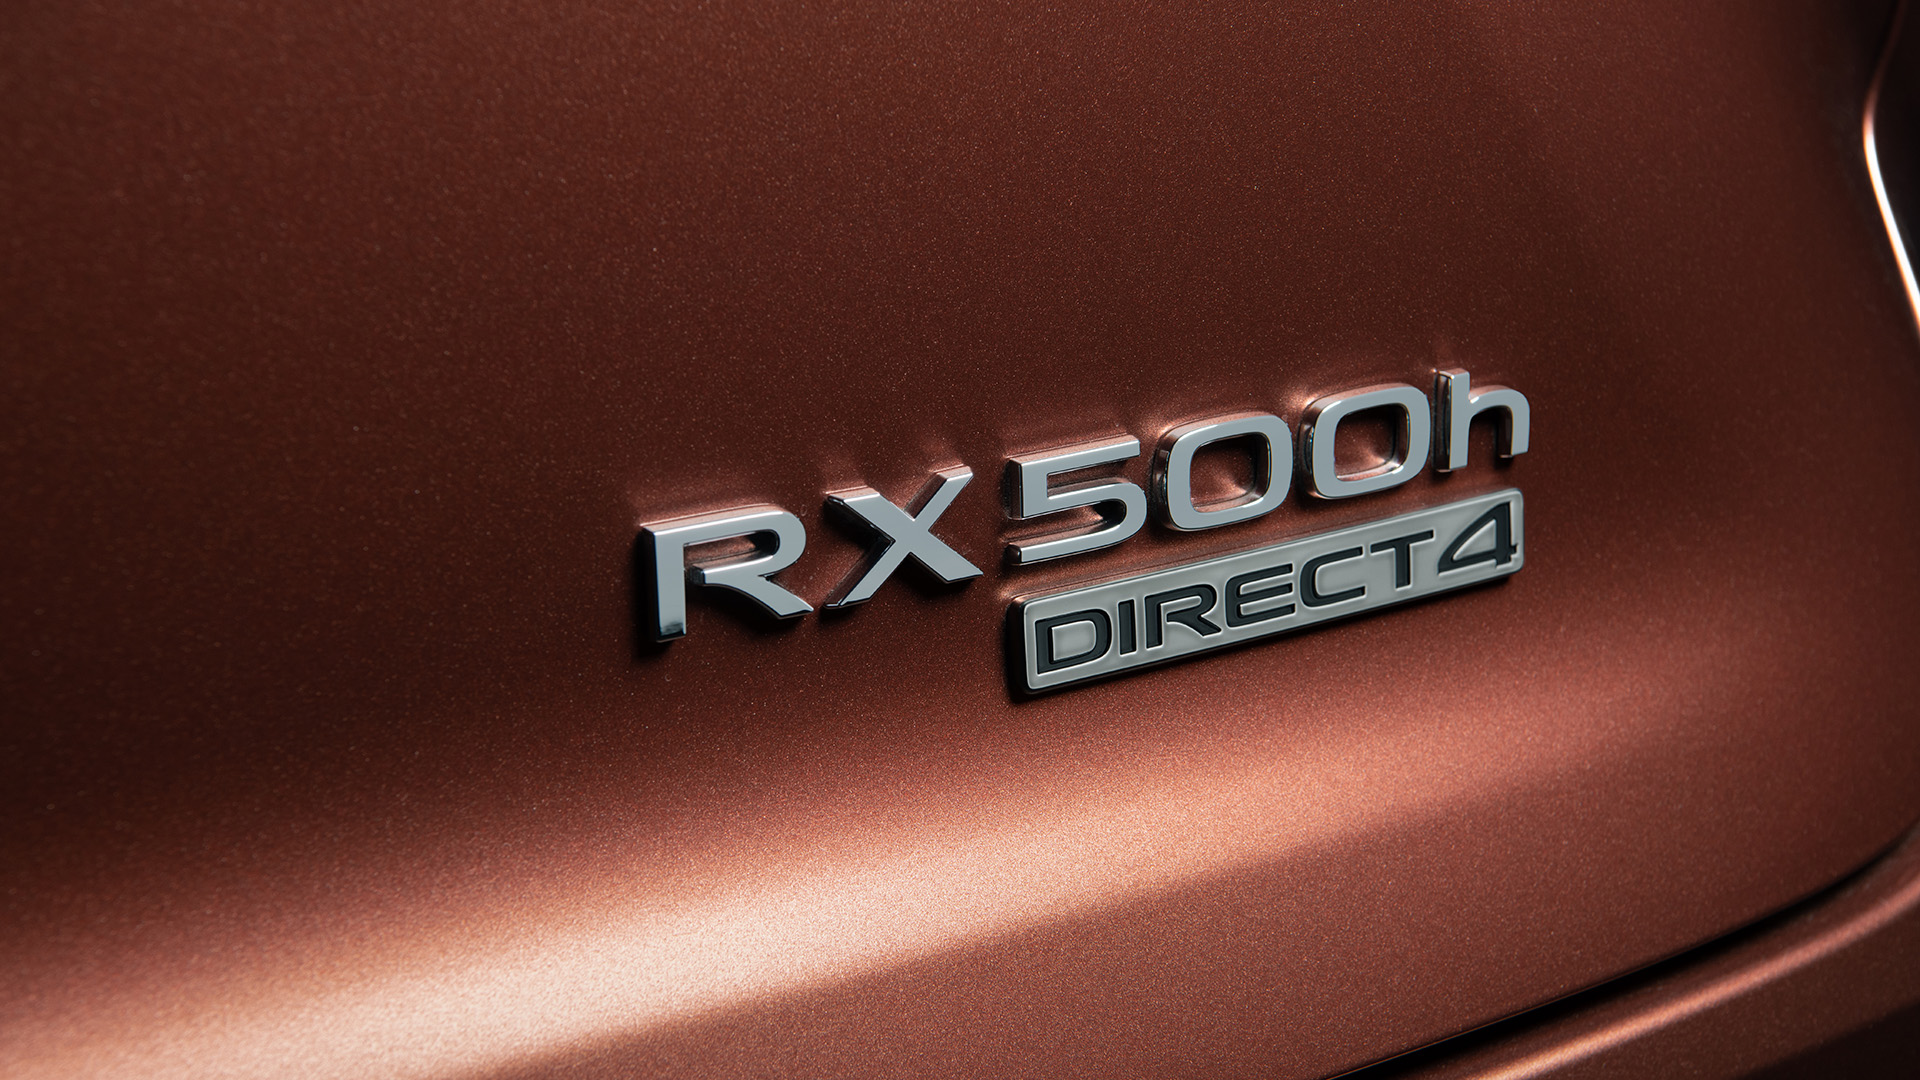 A close up of the badge on a copper colored RX that Reads RX500h Direct 4.